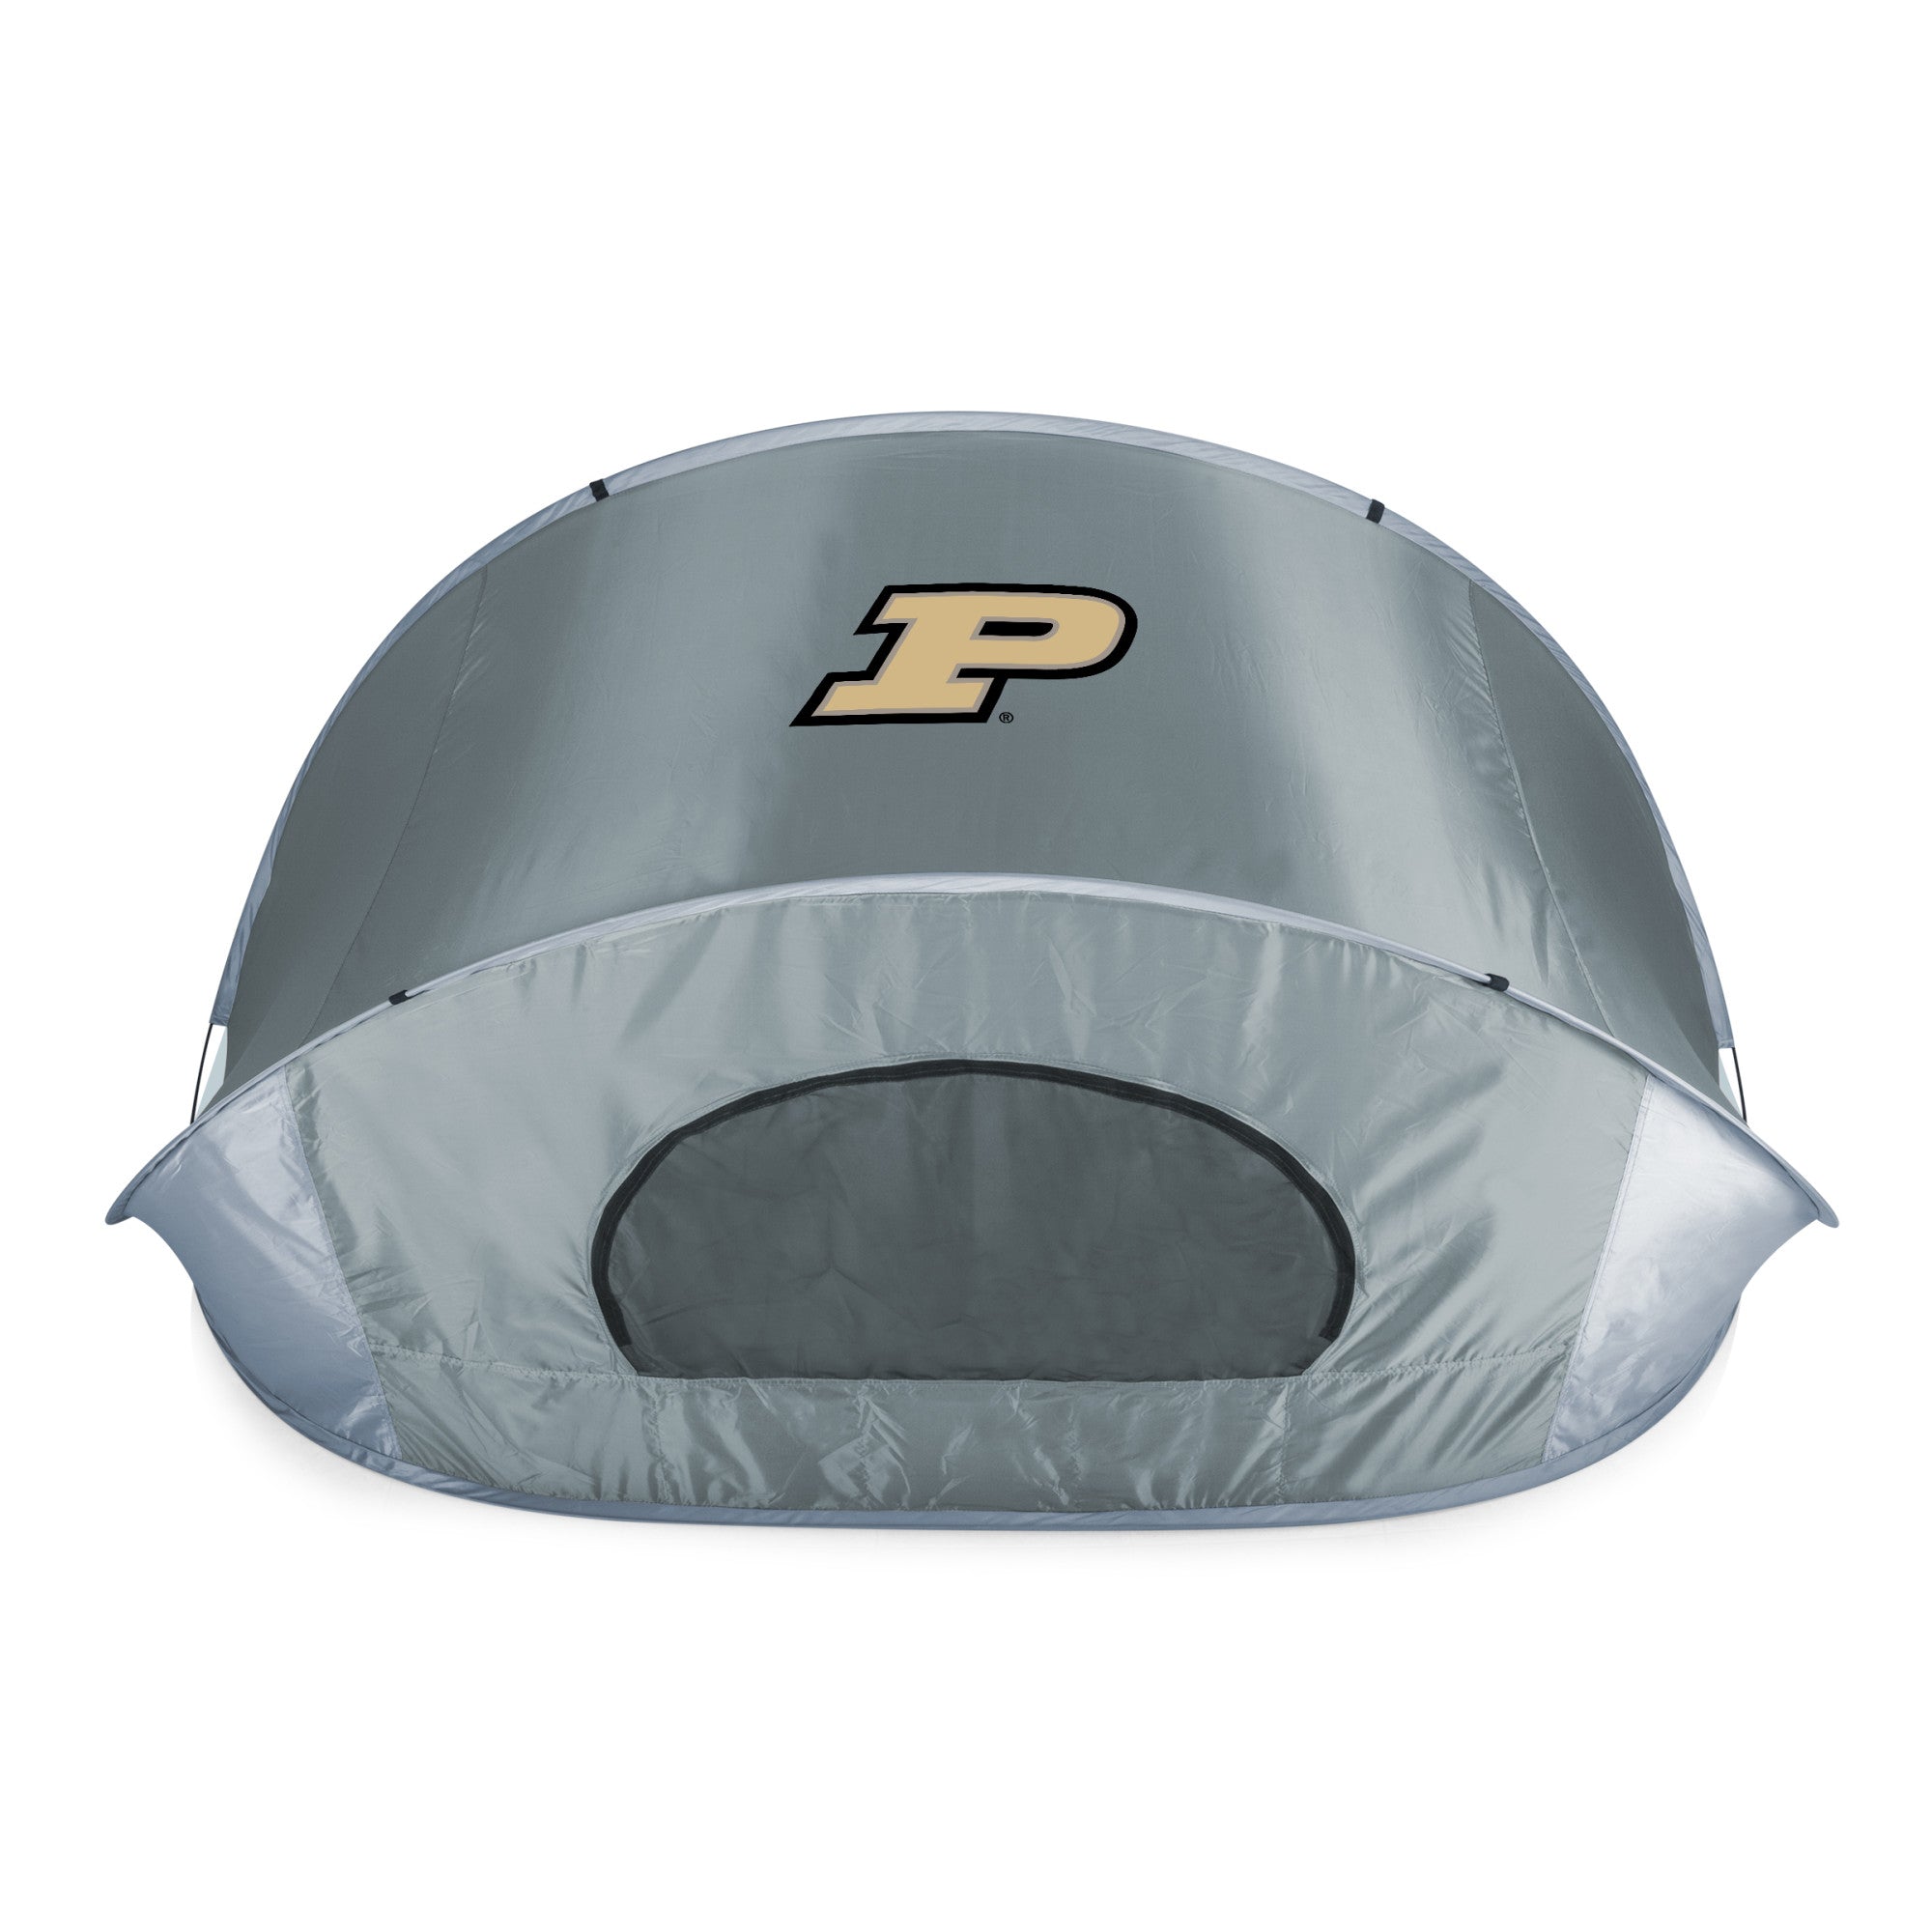 Purdue Boilermakers - Manta Portable Beach Tent, (Gray with Black Accents)